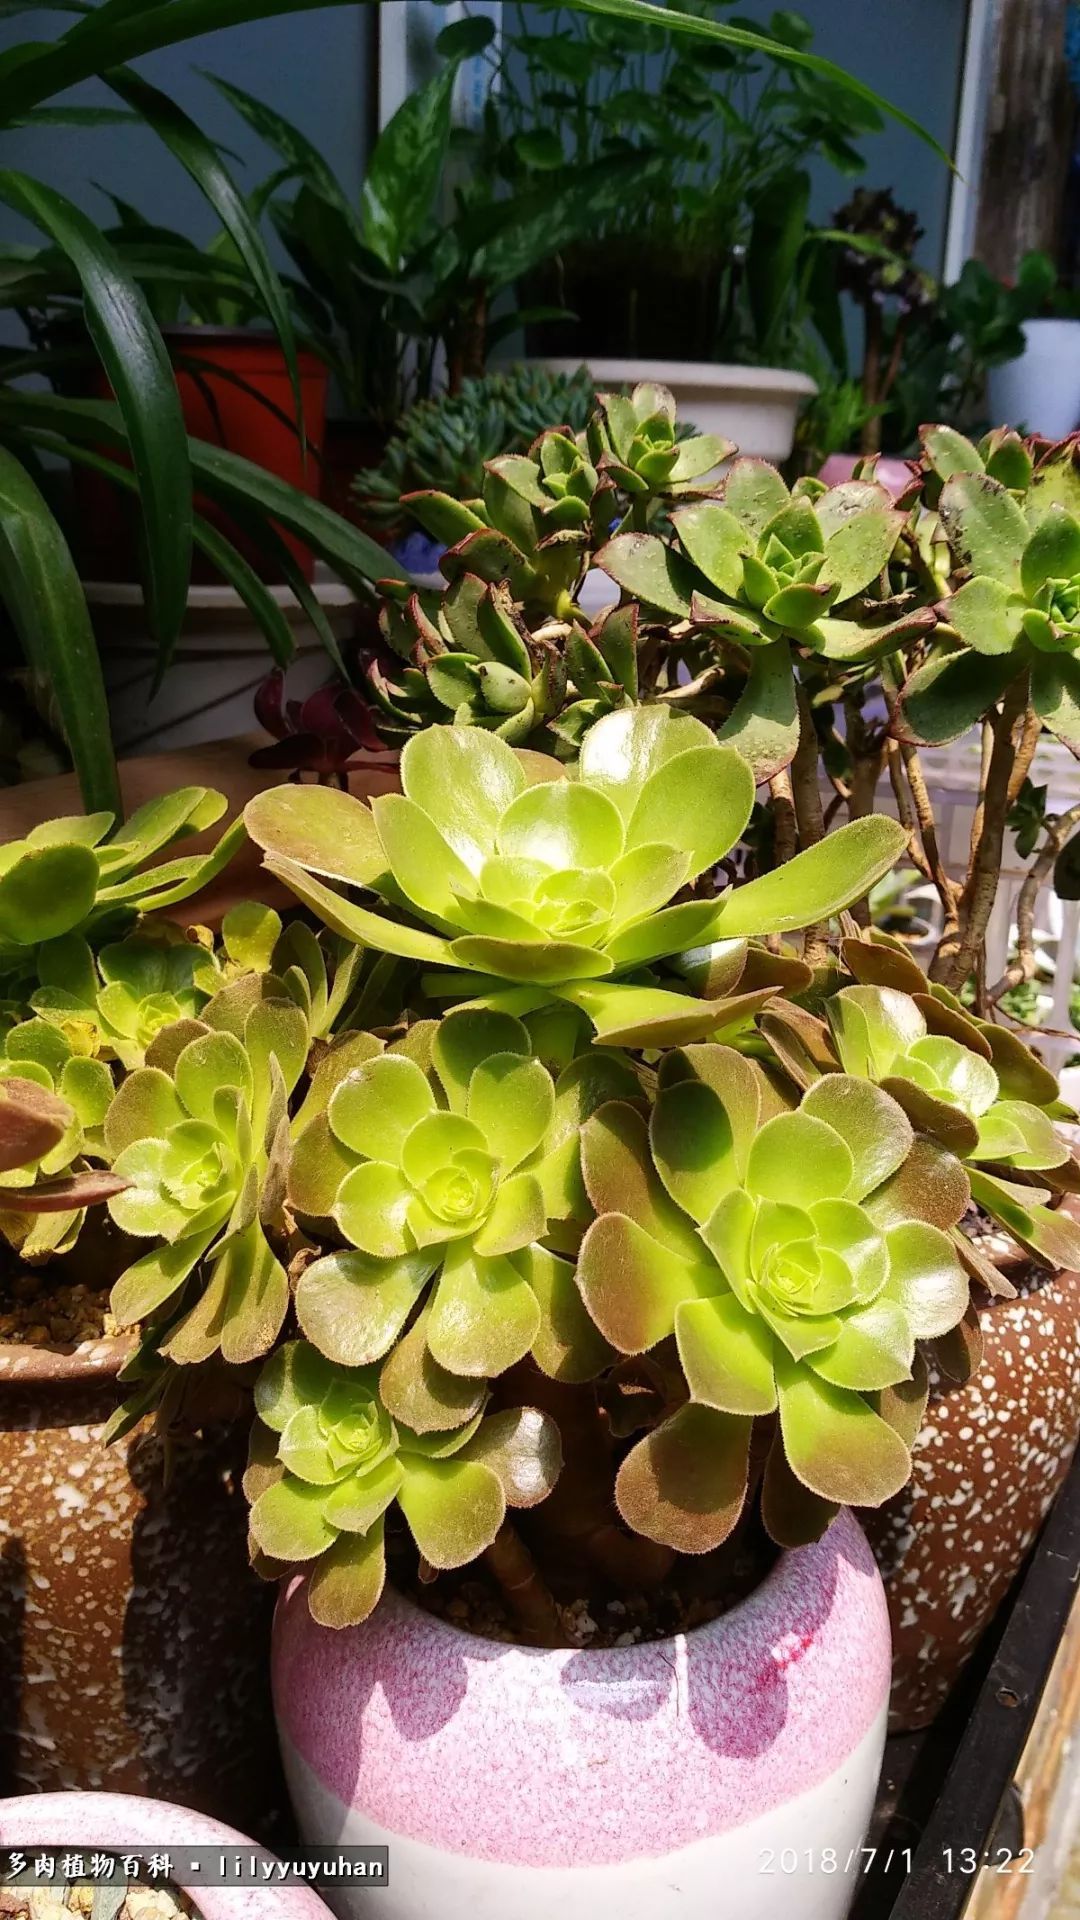 Sunshine is the most beautiful filter for succulent plants. Flowers and plants are more beautiful in the rain.